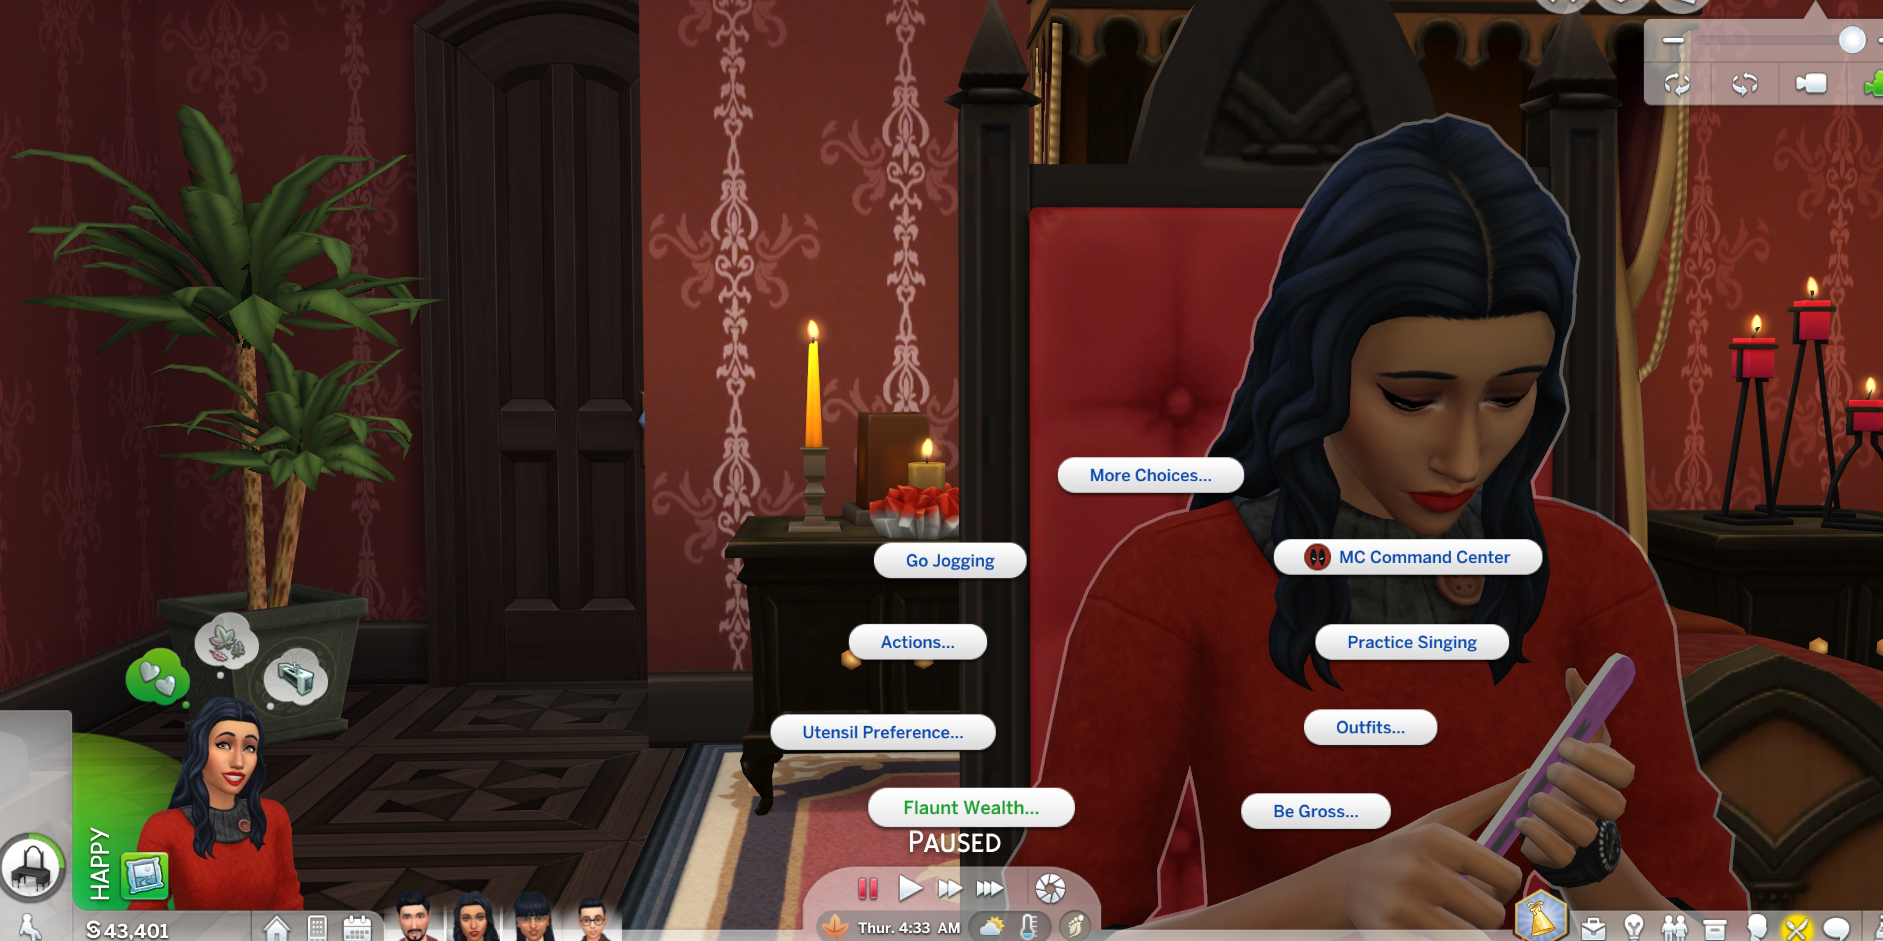 Bella Goth sitting at a vanity, with MC Command Center and Sims 4 UI visible